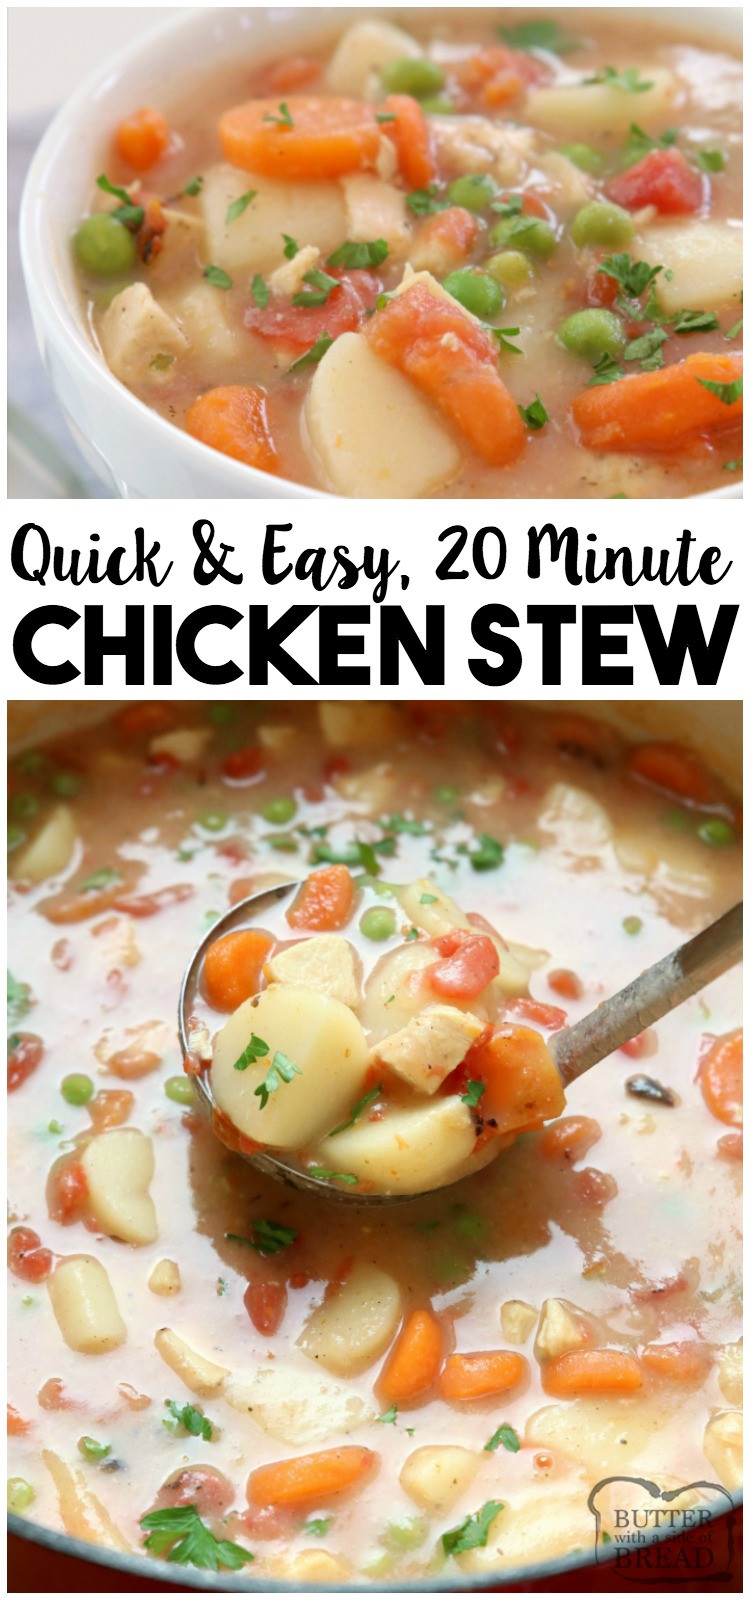 Easy Chicken Stew Recipe
 20 MINUTE CHICKEN STEW RECIPE Butter with a Side of Bread